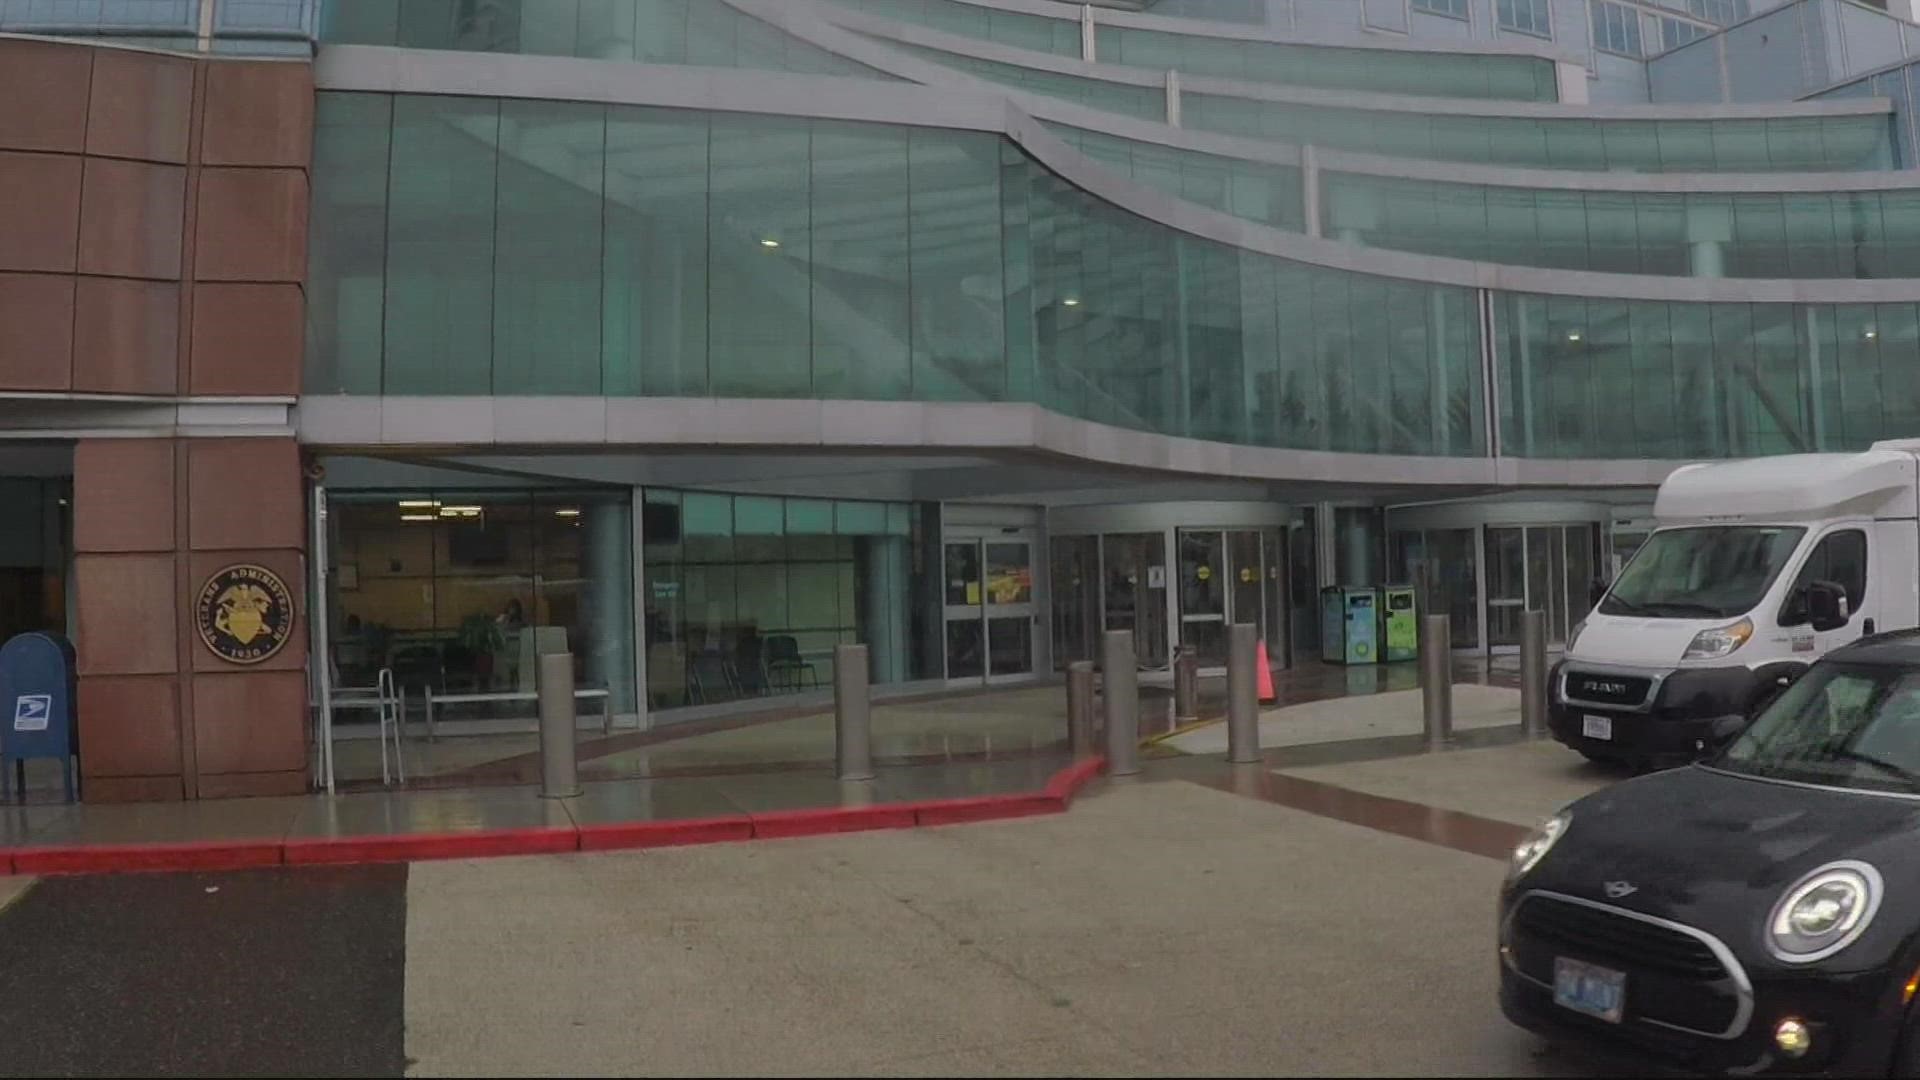 A job fair was held at the Portland VA Medical Center to fill some 25 jobs.